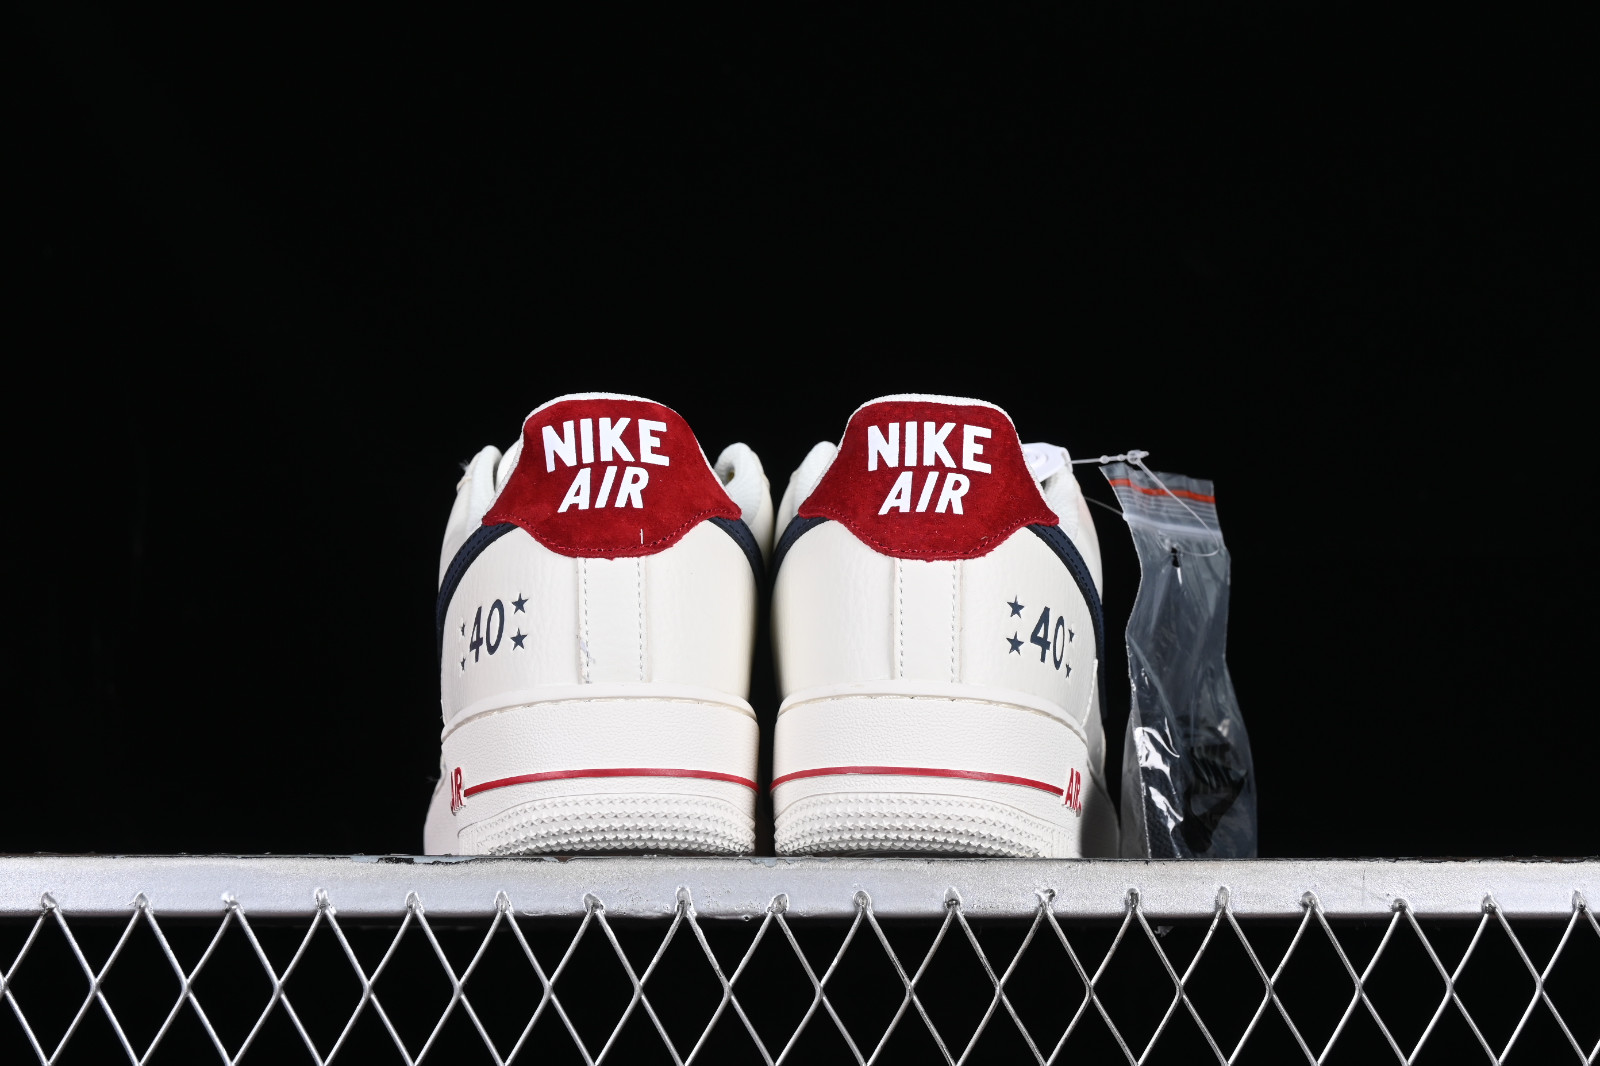 Nike Air Force 1 '07 Sneakers in White and Red